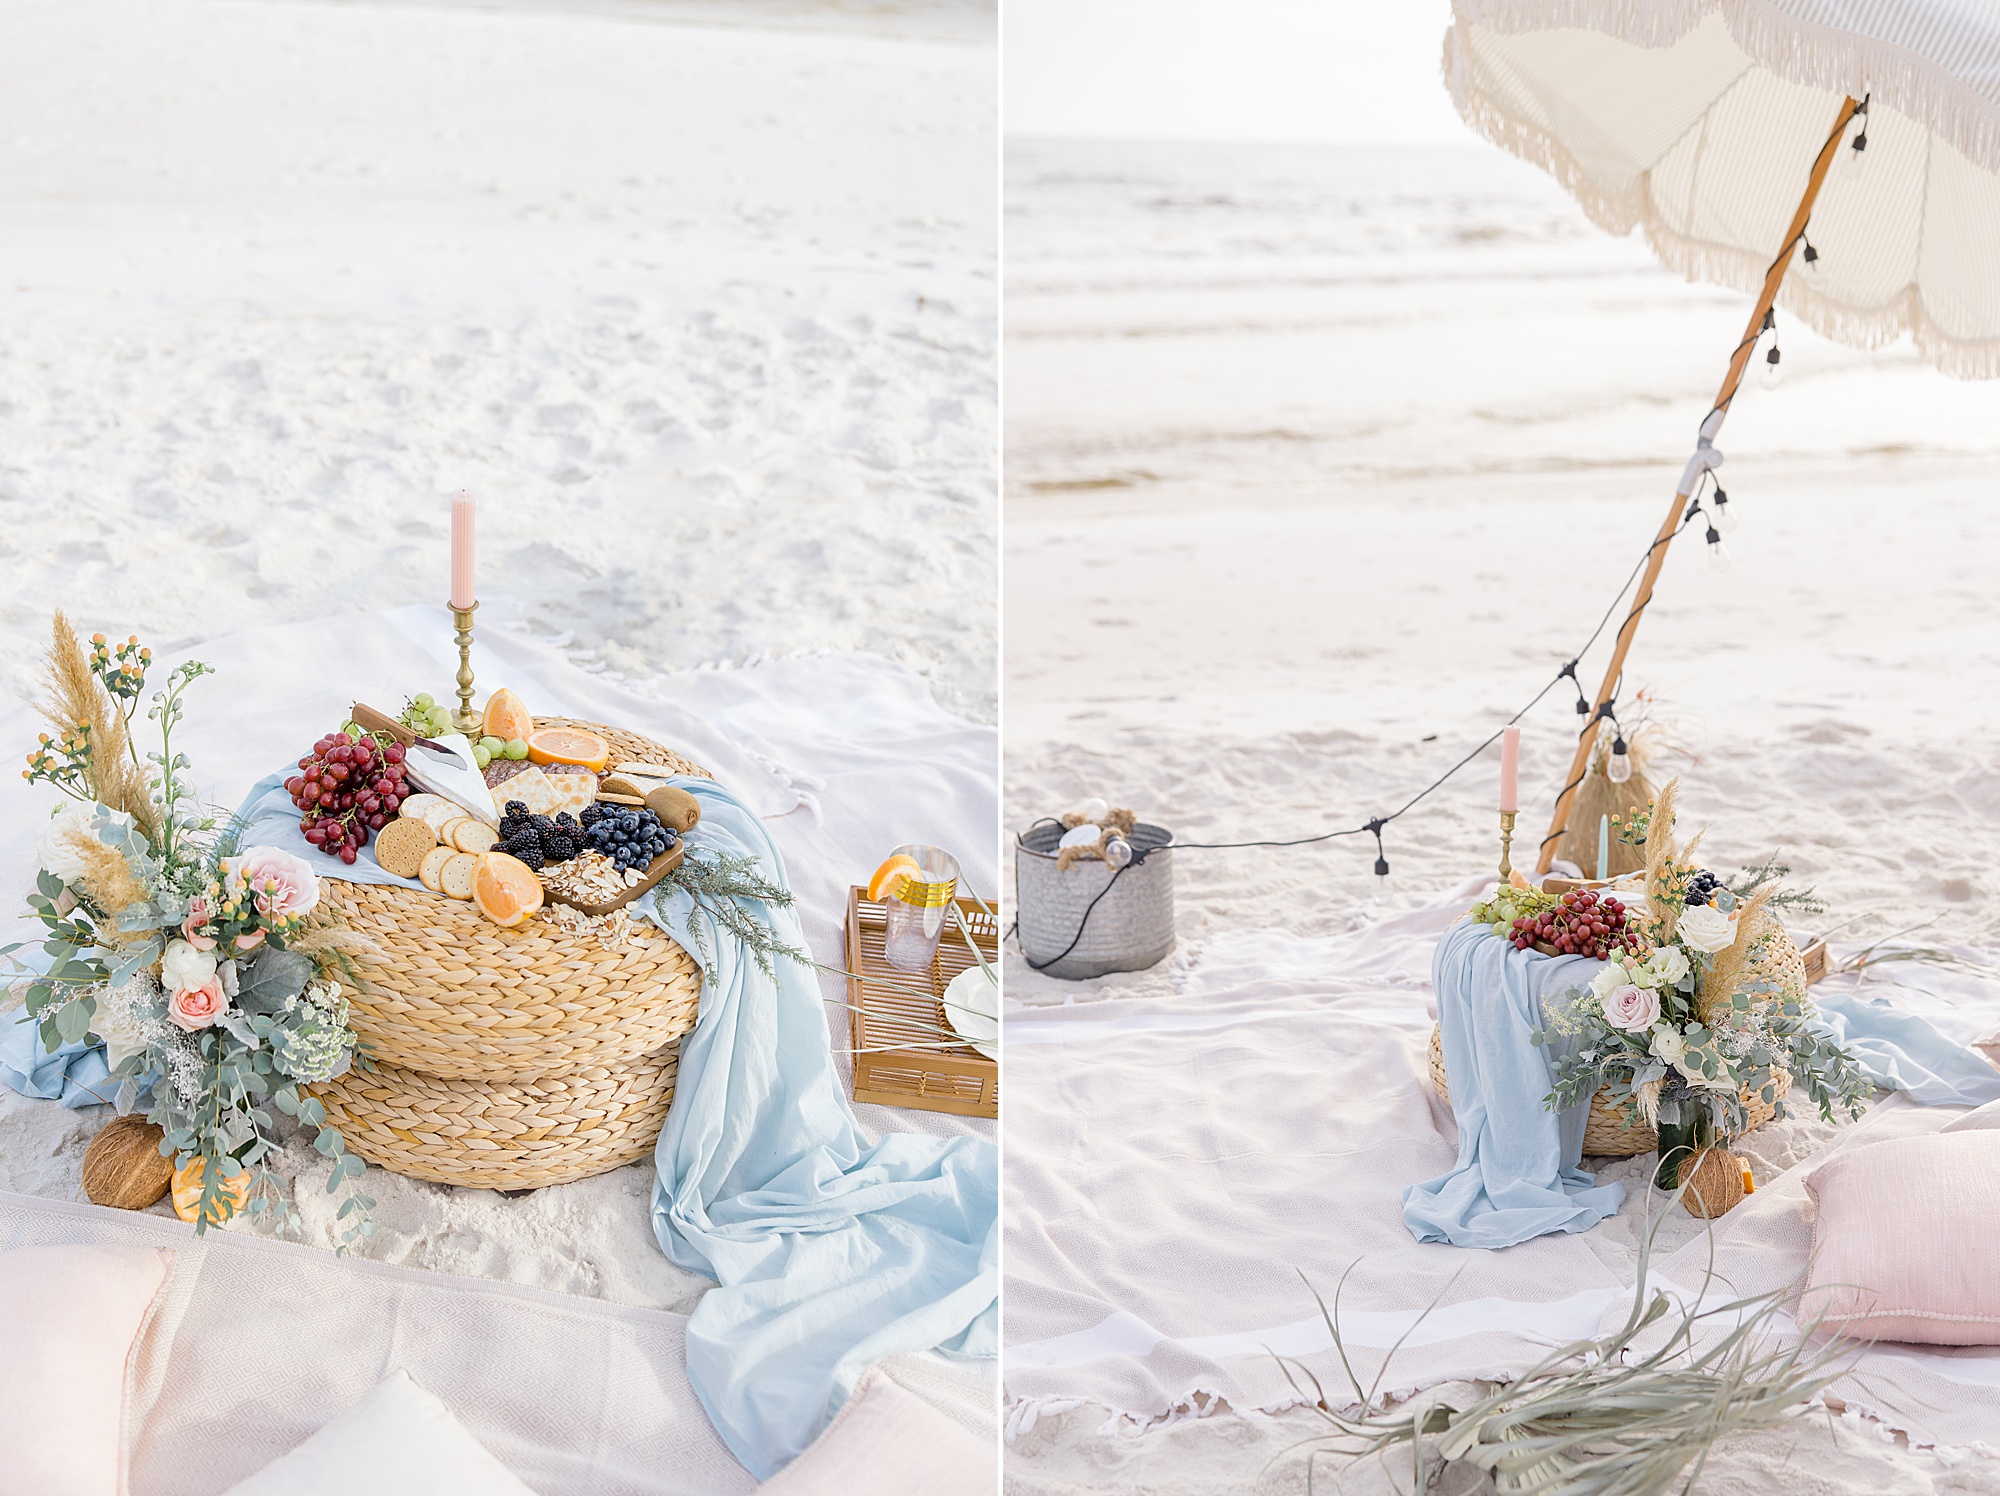 details for romantic Rosemary Beach engagement session picnic